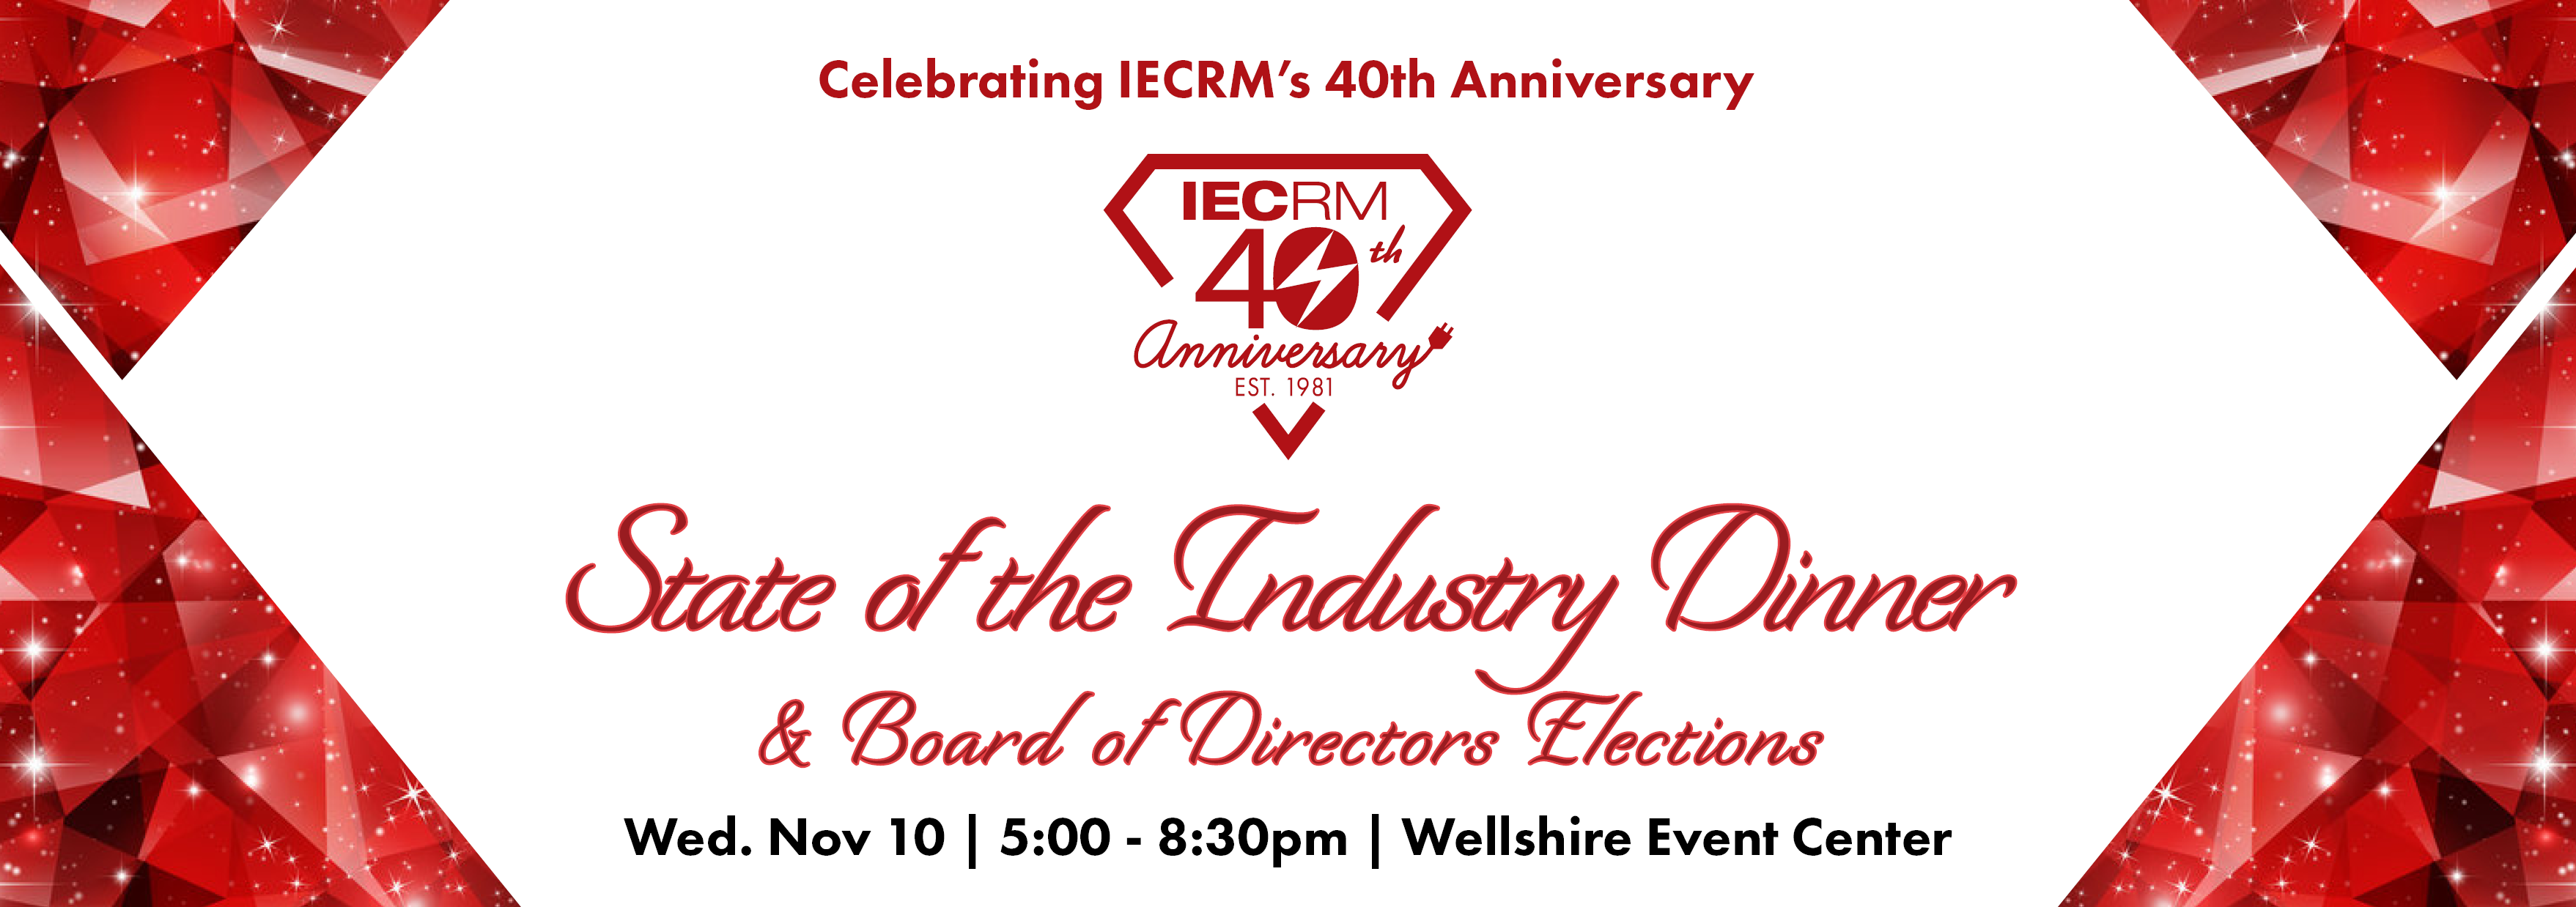 Sponsor the IECRM State of the Industry Dinner